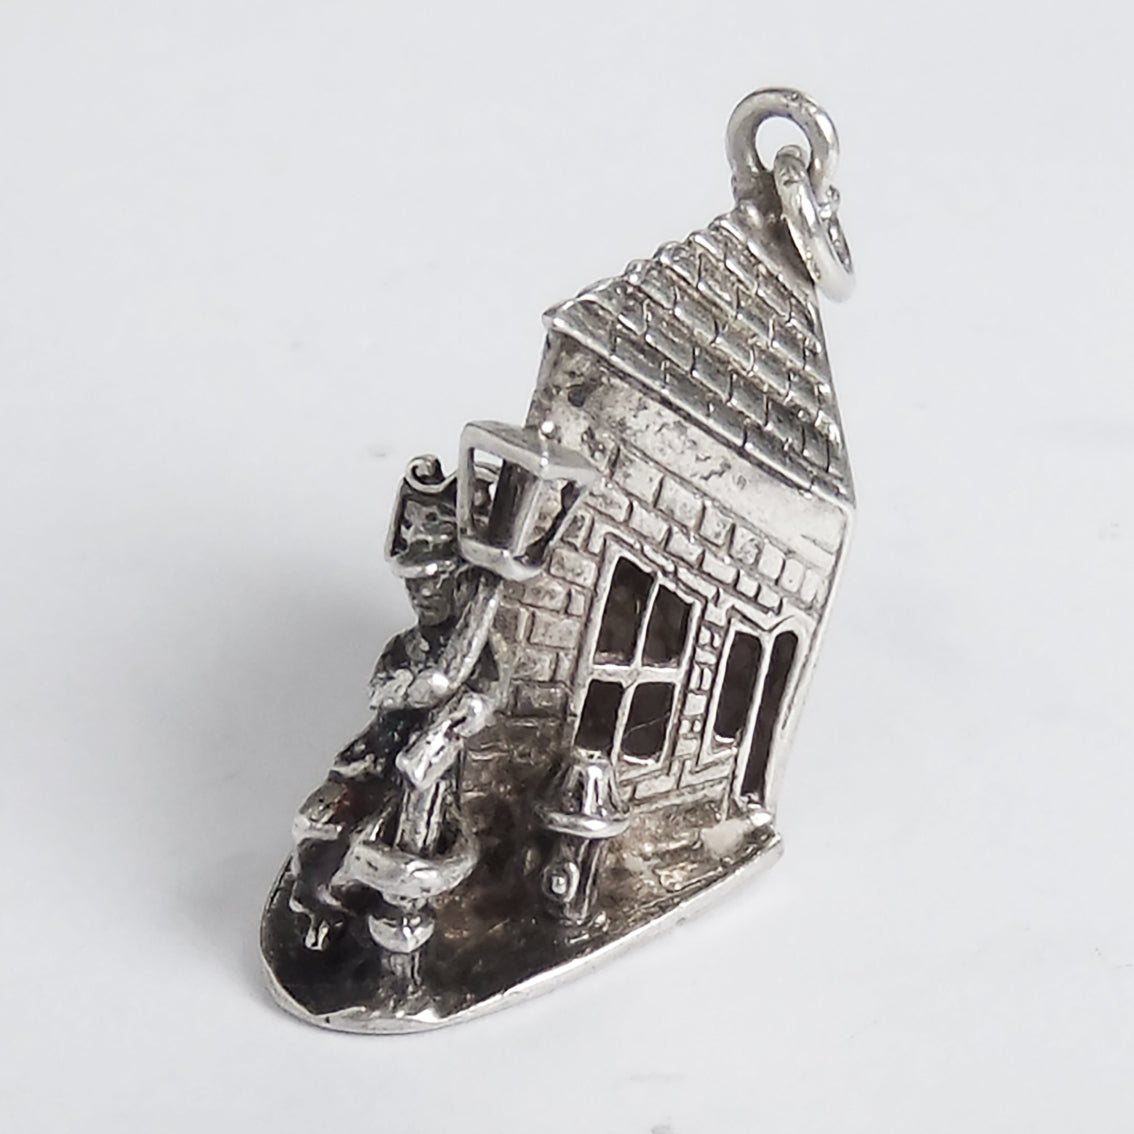 Vintage silver drunk person and bottle by lamppost outside pub charm